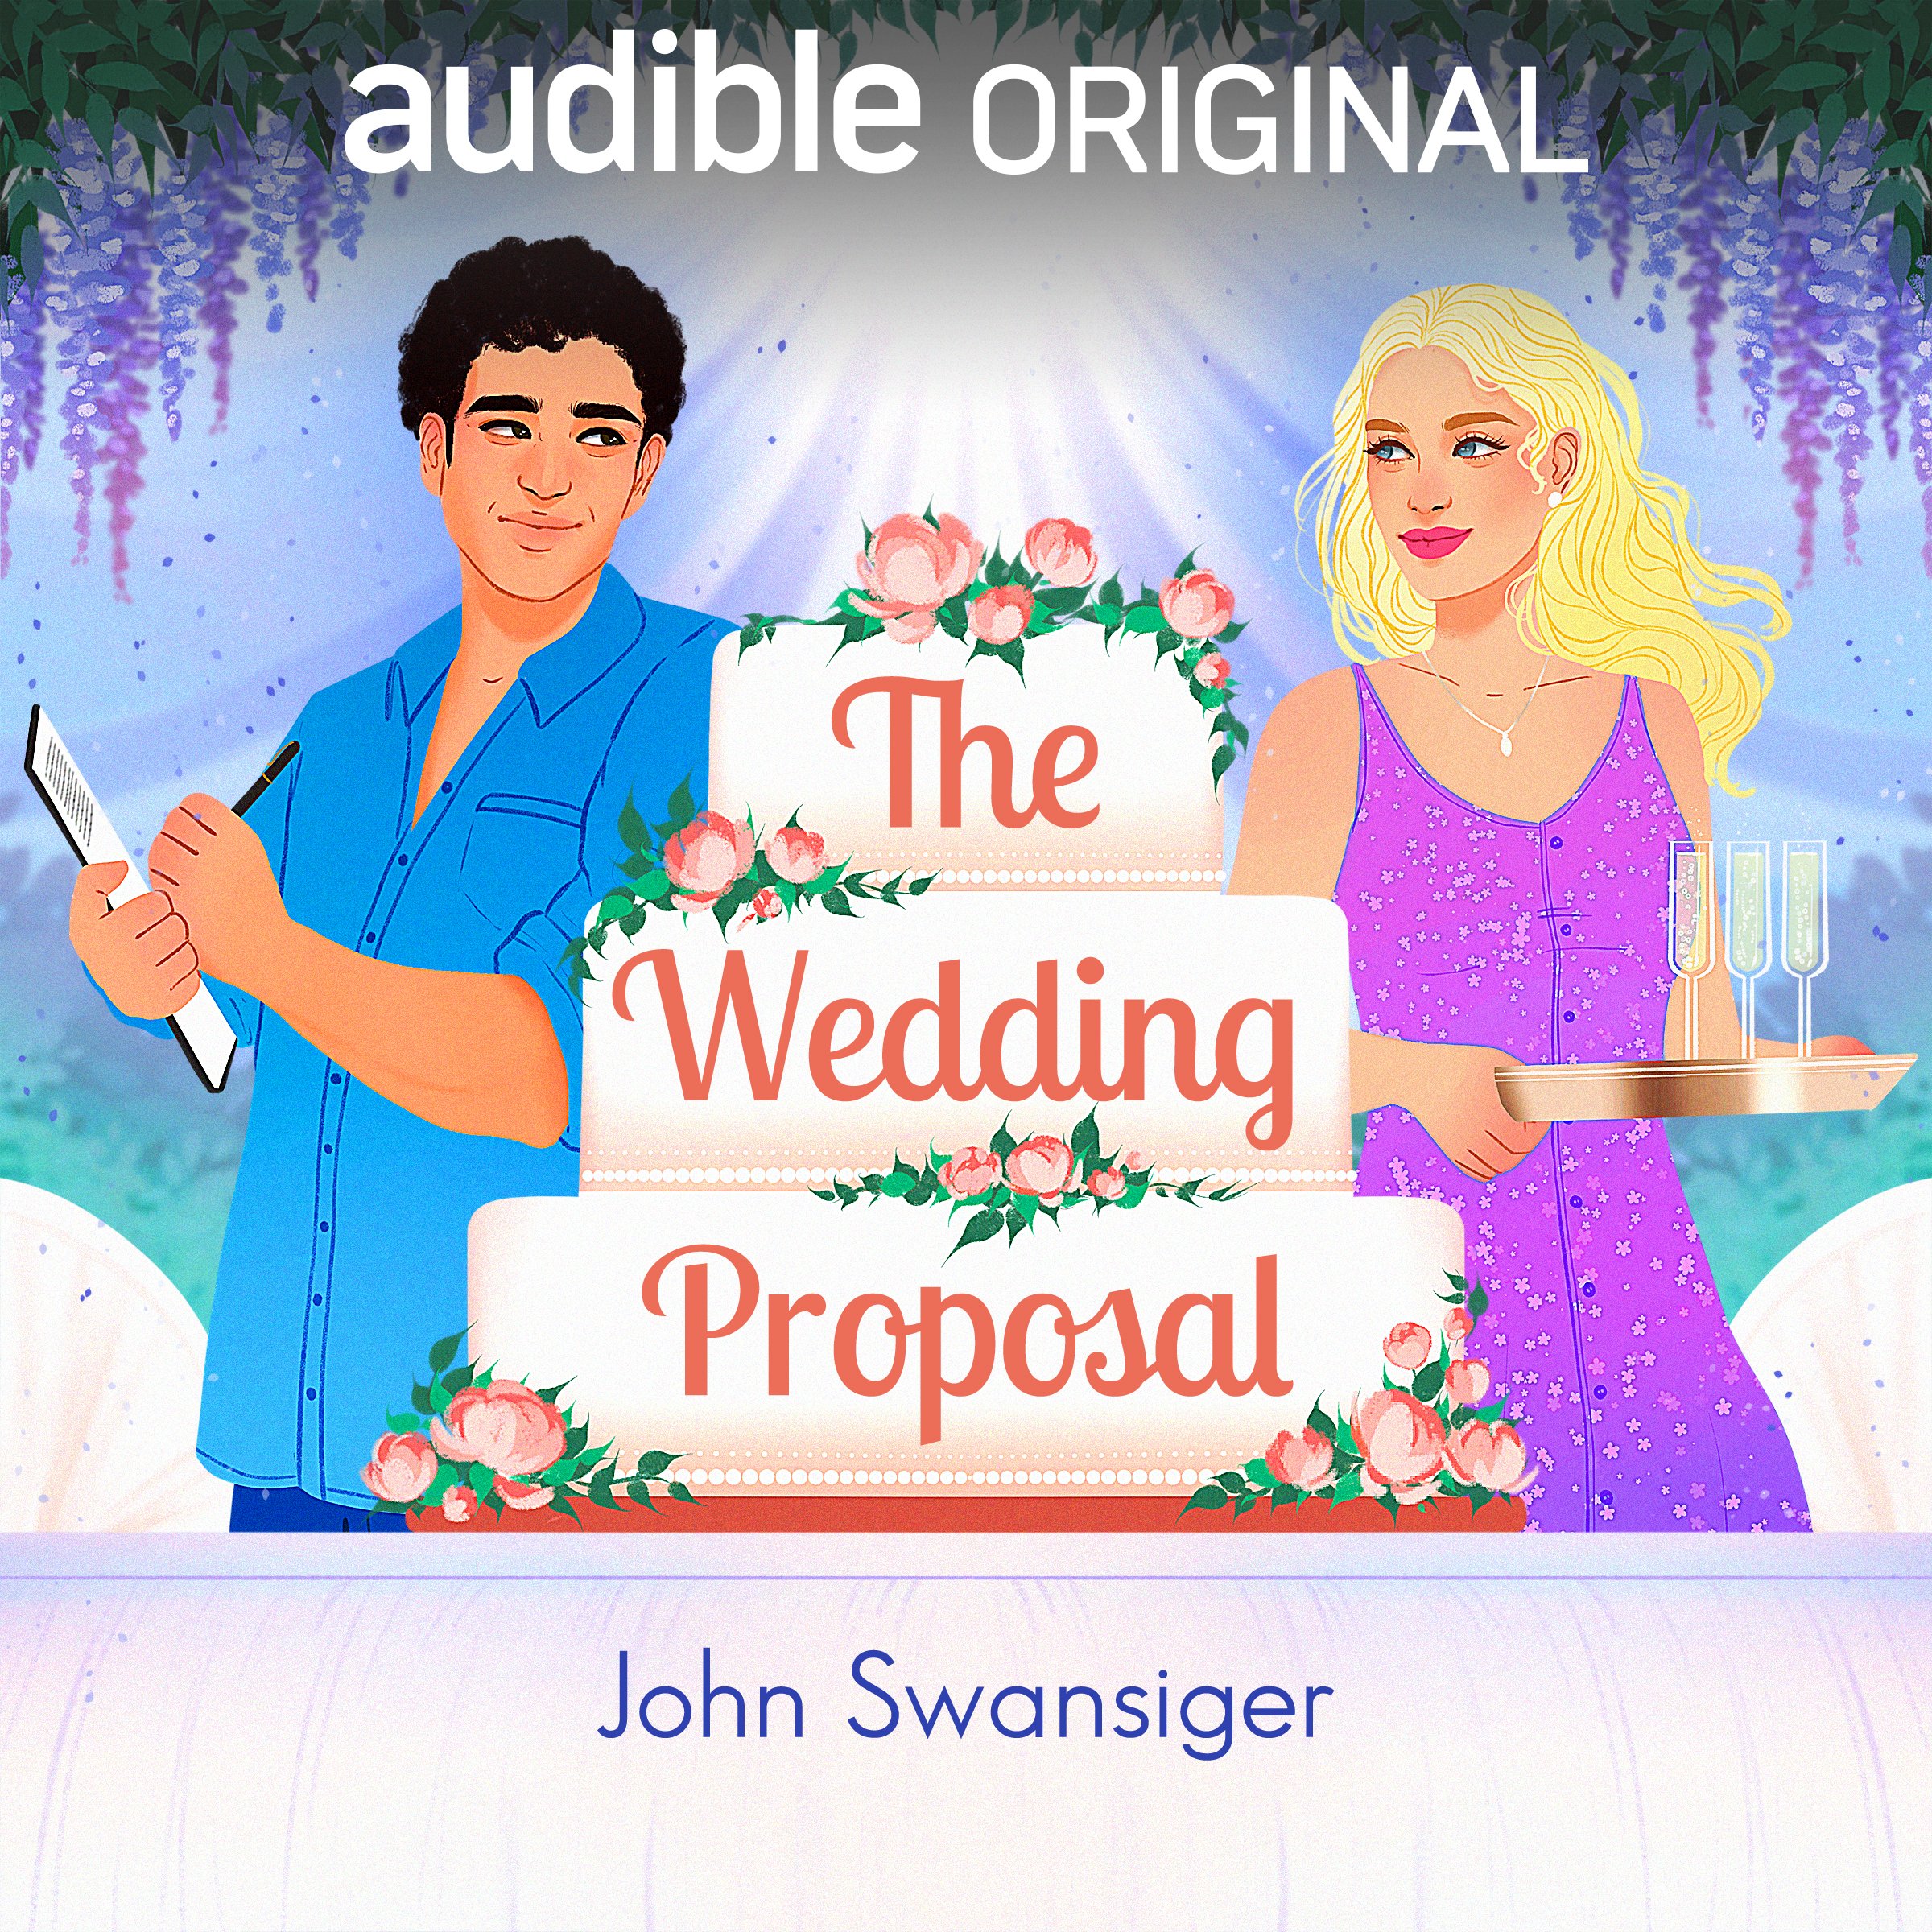 Cover for " The Wedding Proposal" by John Swansiger